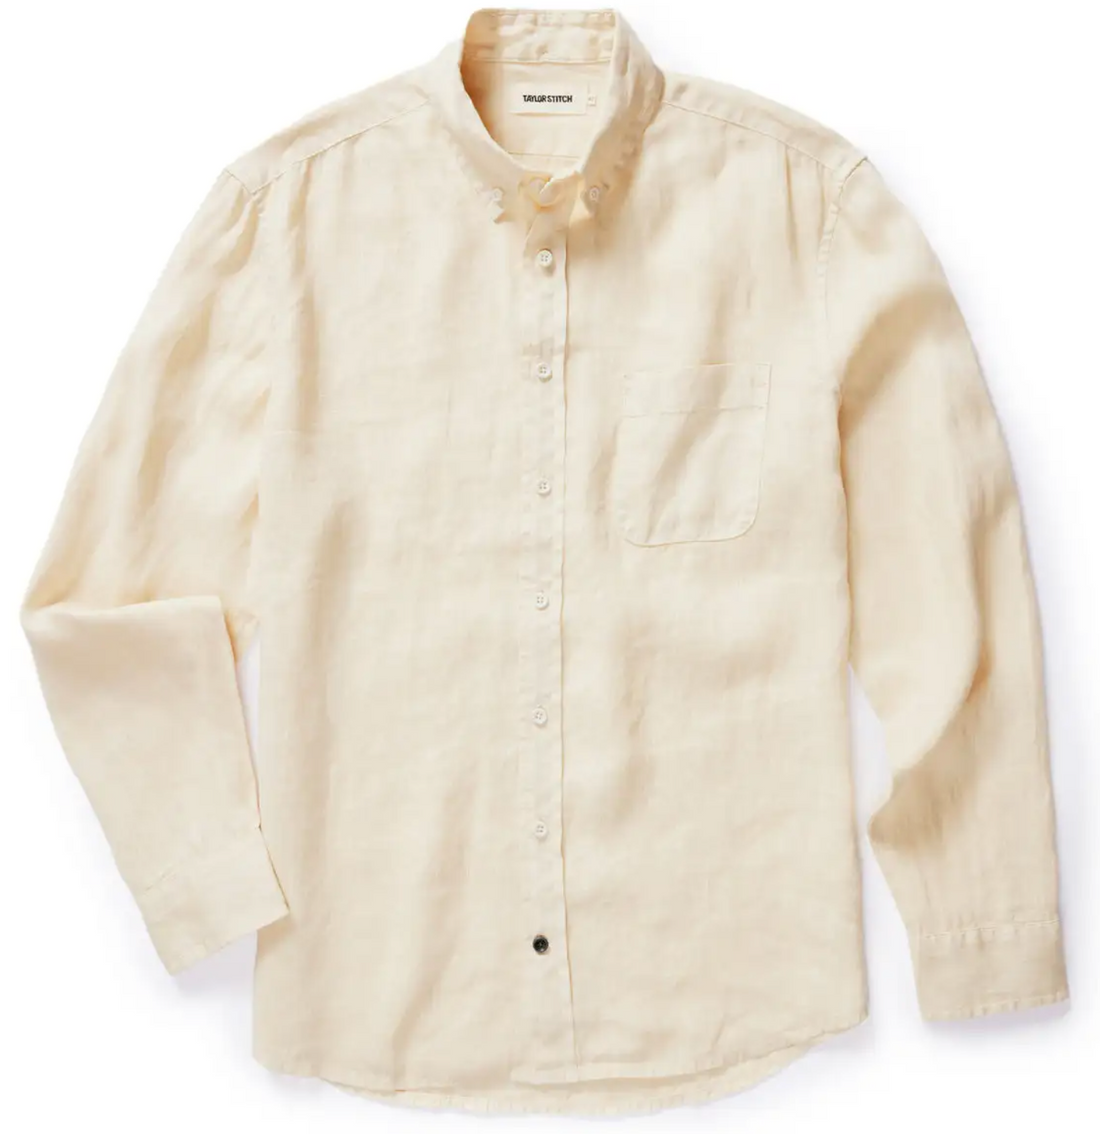 Taylor Stitch - The Jack in Horchata Linen